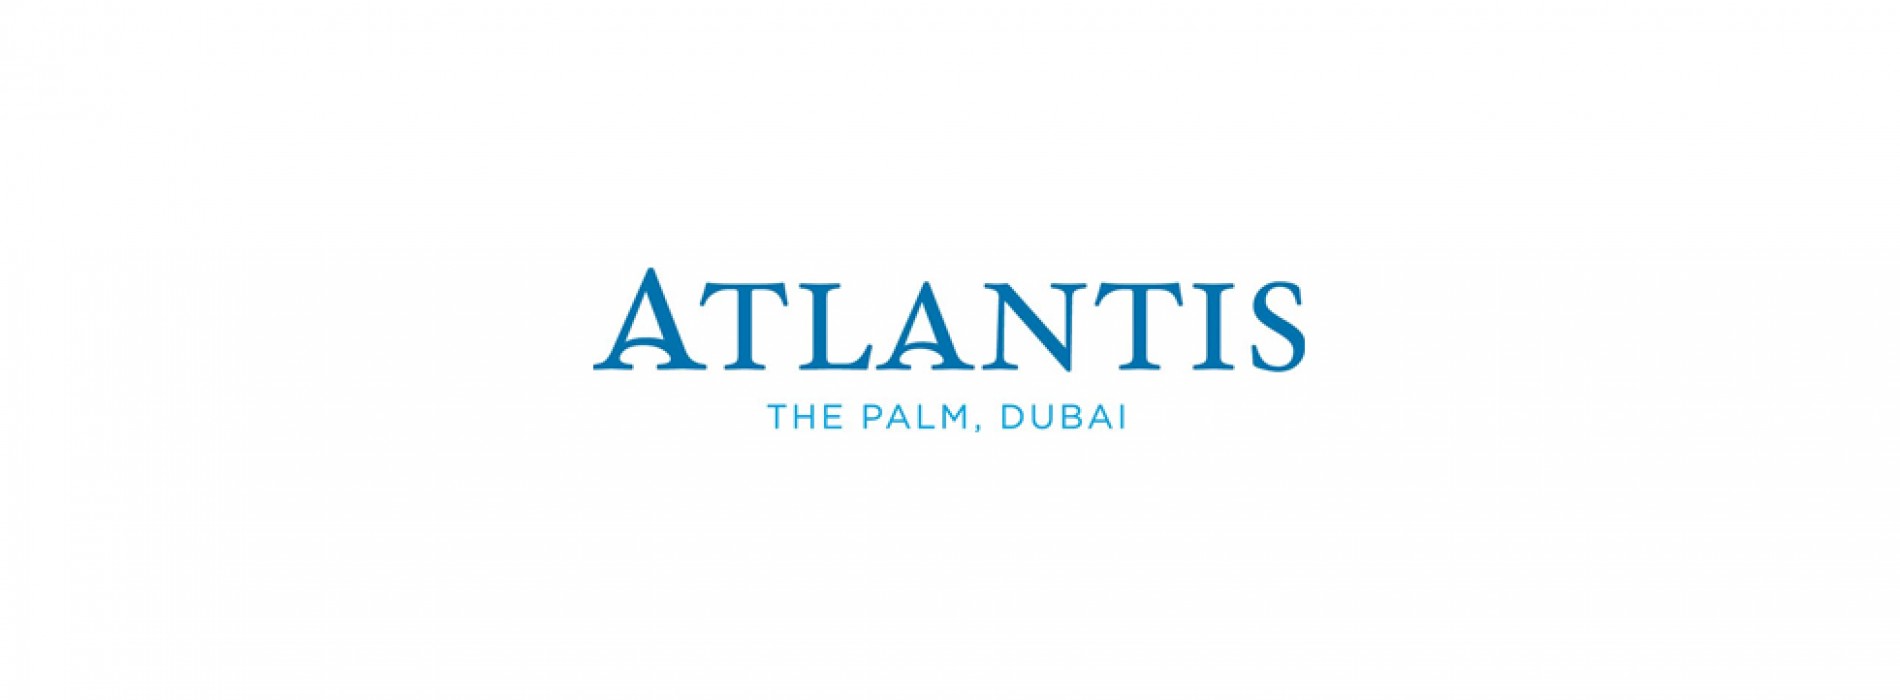 Celebrate this Valentine’s Day at Atlantis, The Palm